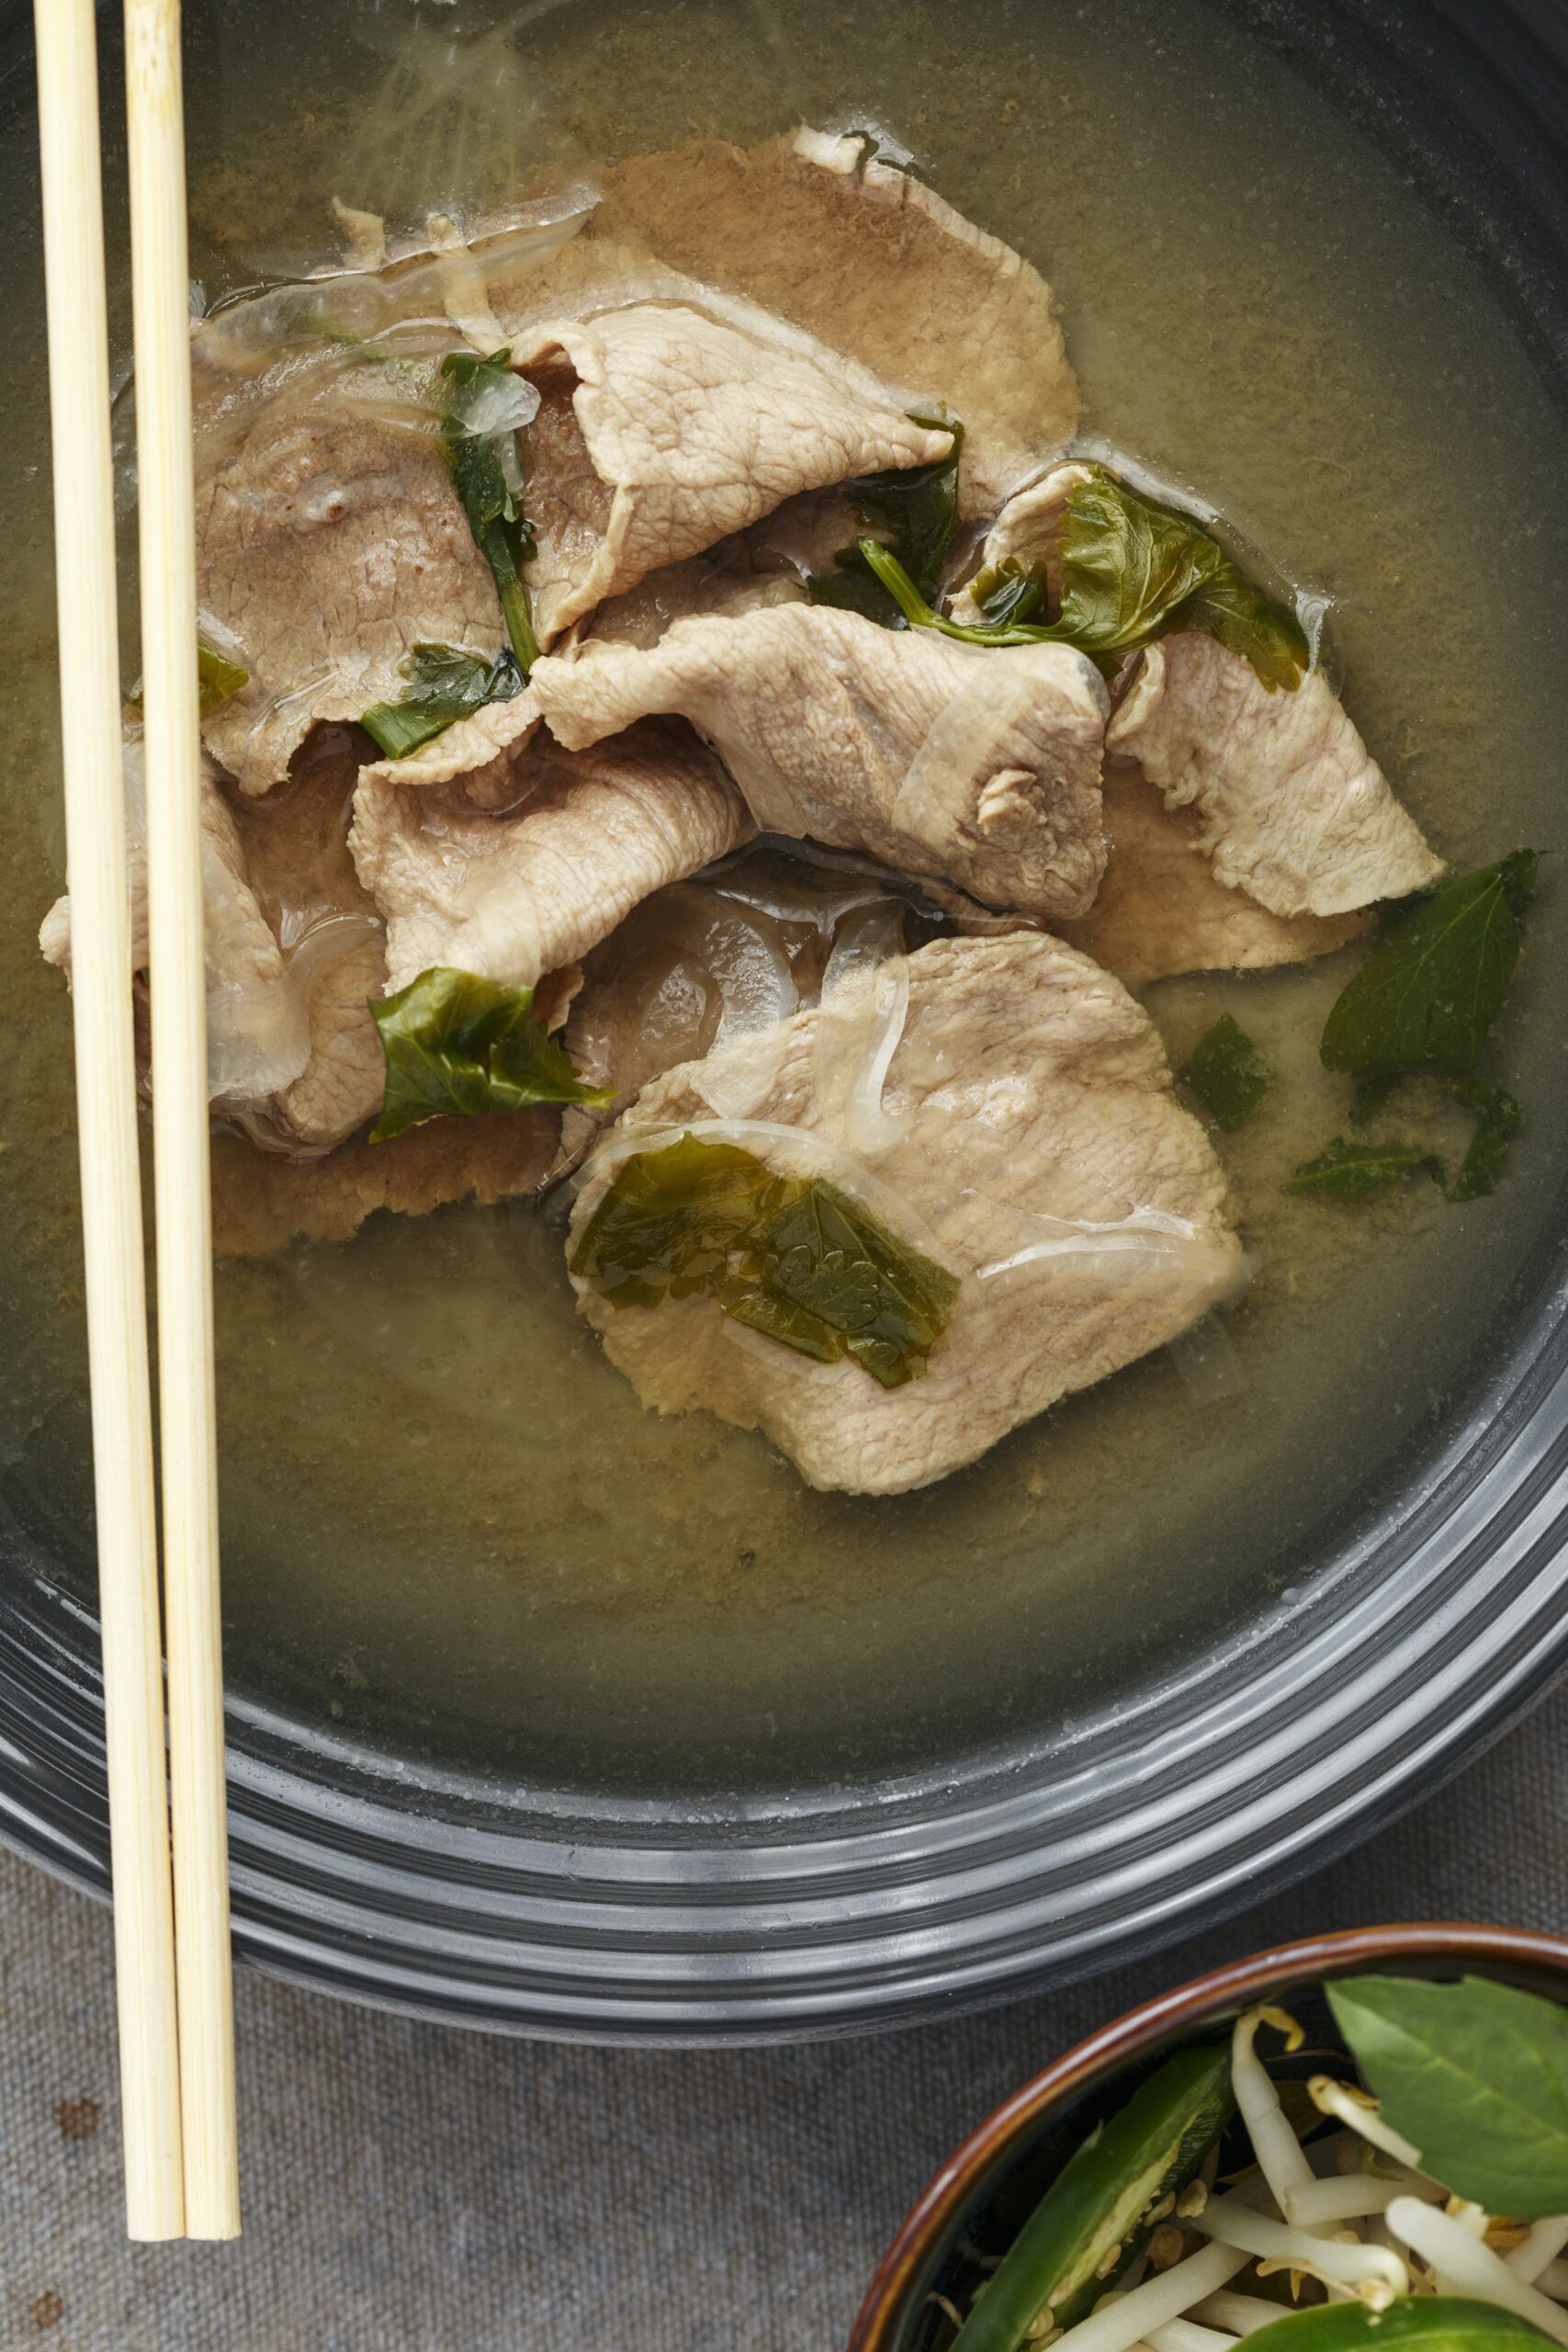 Whats Your Quick And Easy Comforting Vietnamese Recipe For Lunch?